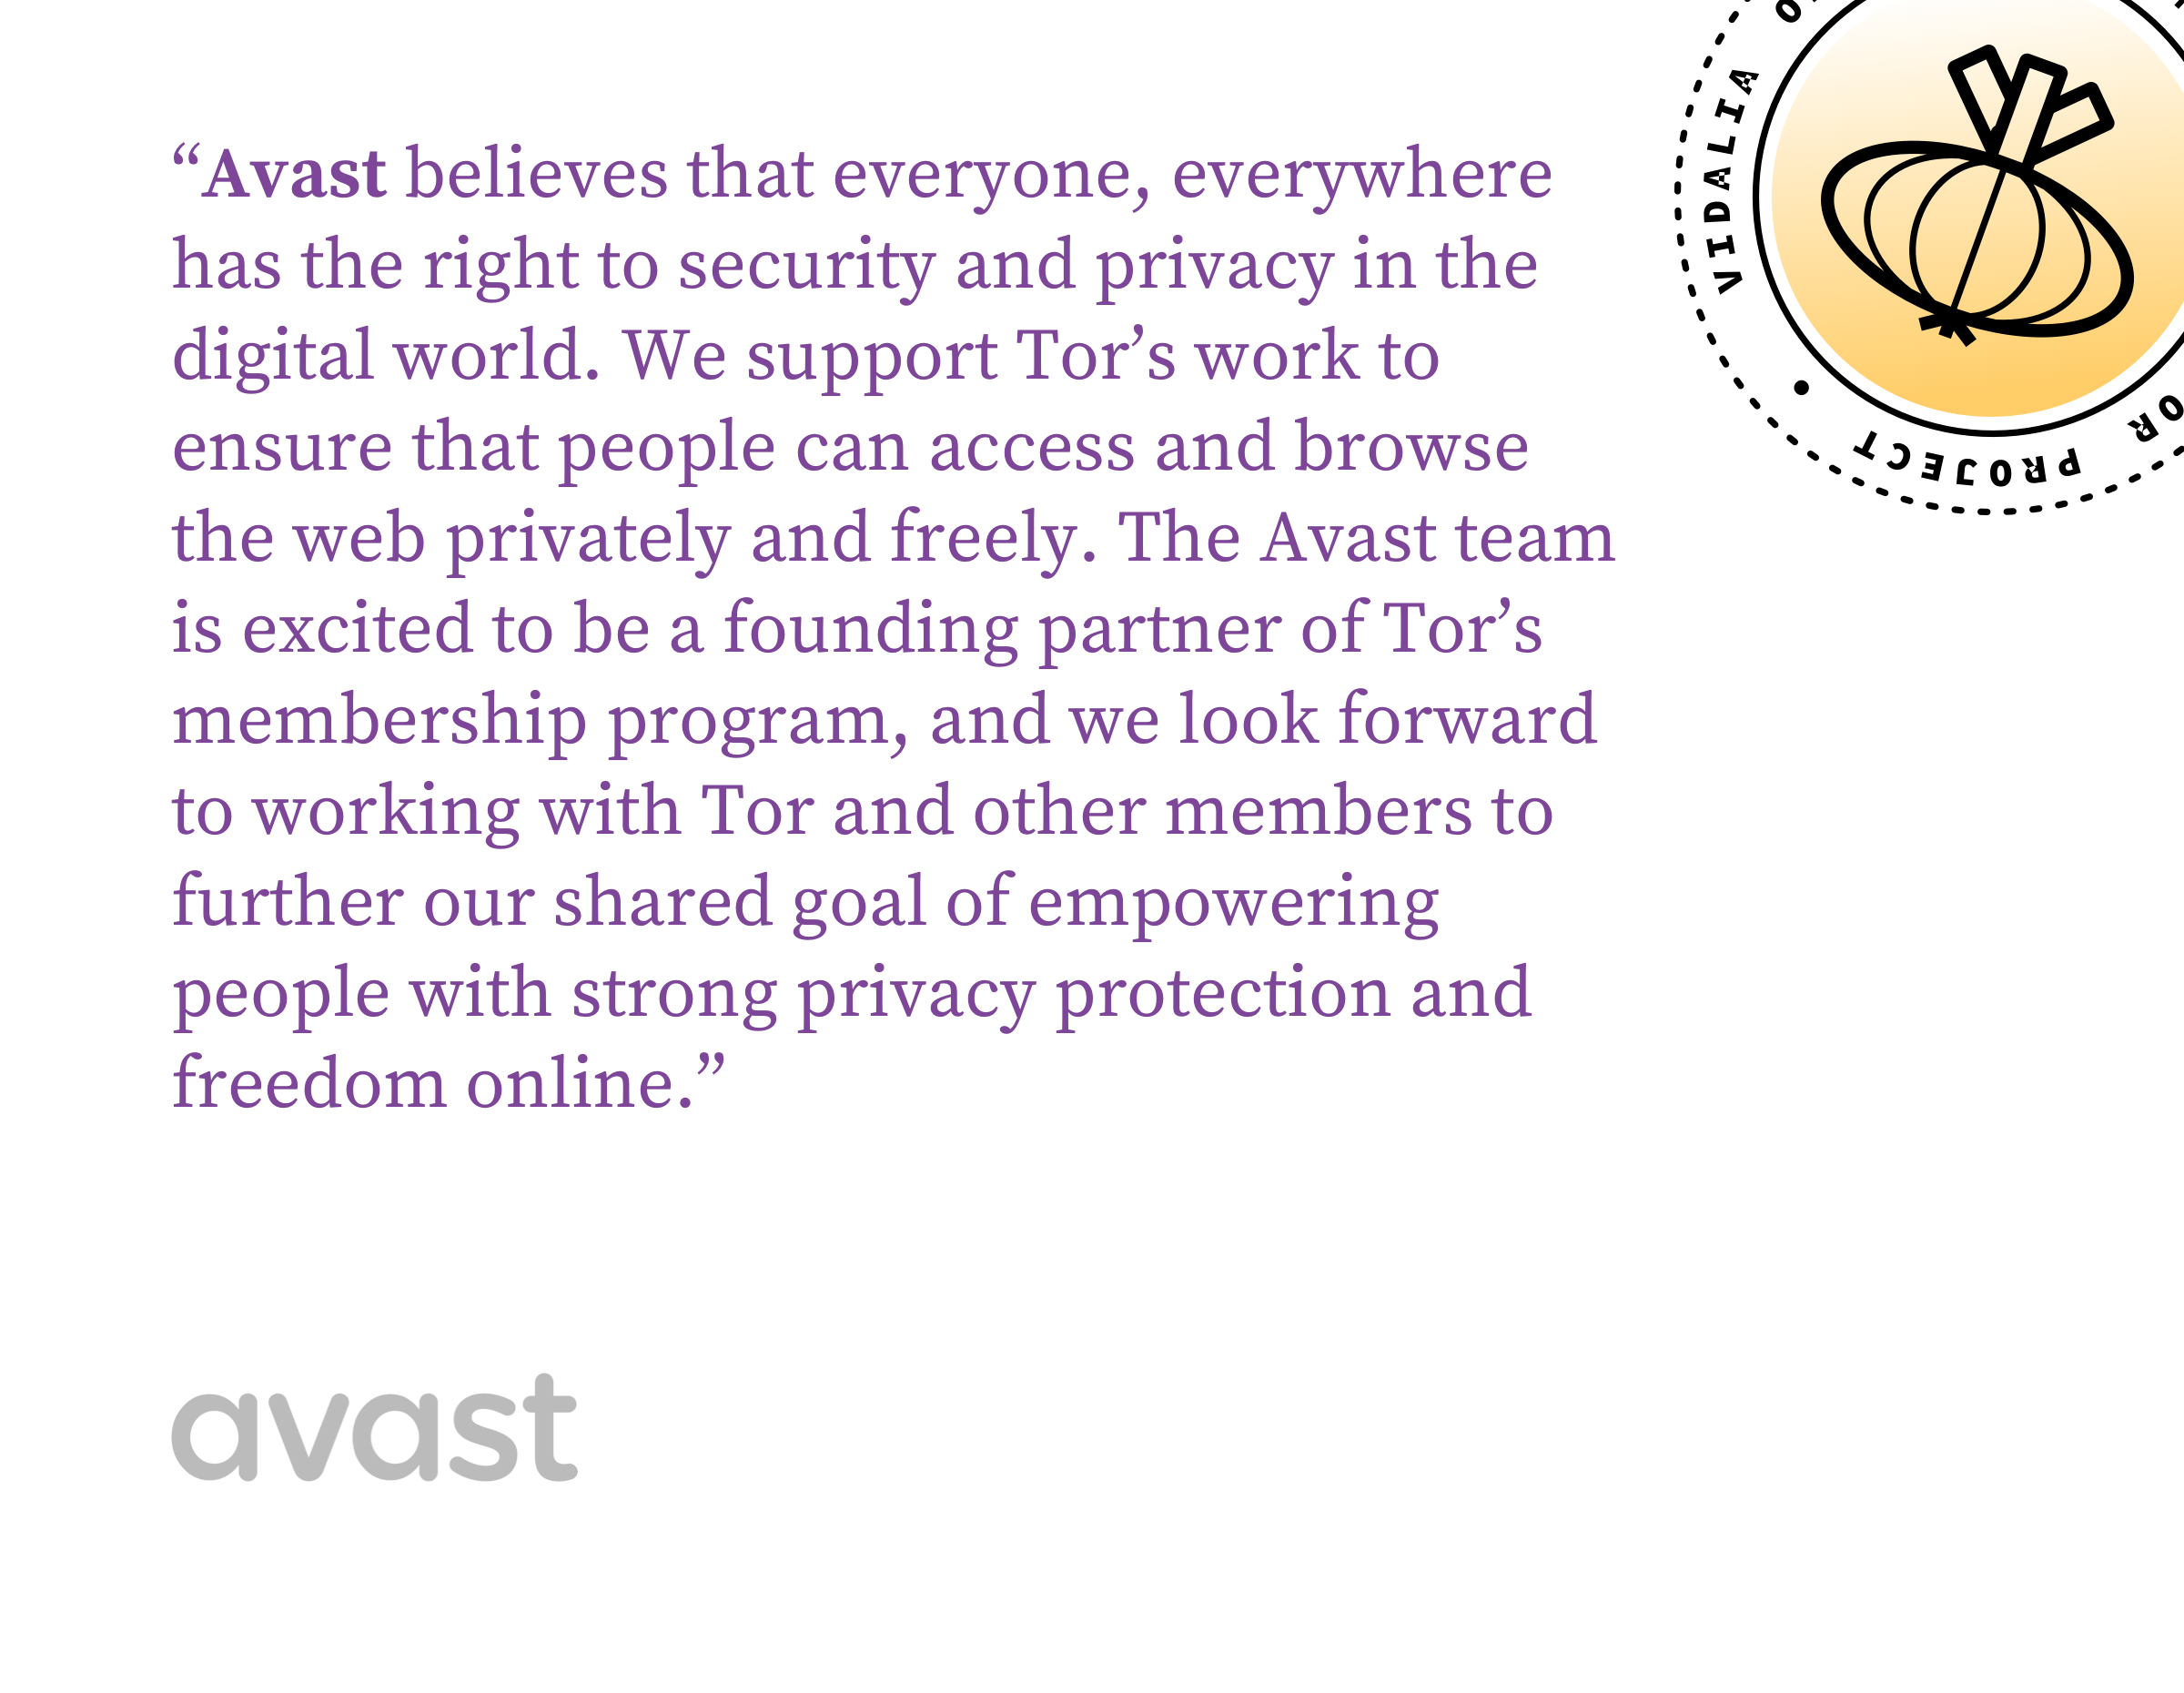 Avast believes that everyone, everywhere has the right to security and privacy in the digital world. We support Tor’s work to ensure that people can access and browse the web privately and freely. The Avast team is excited to be a founding partner of Tor’s membership program, and we look forward to working with Tor and other members to further our shared goal of empowering people with strong privacy protection and freedom online.